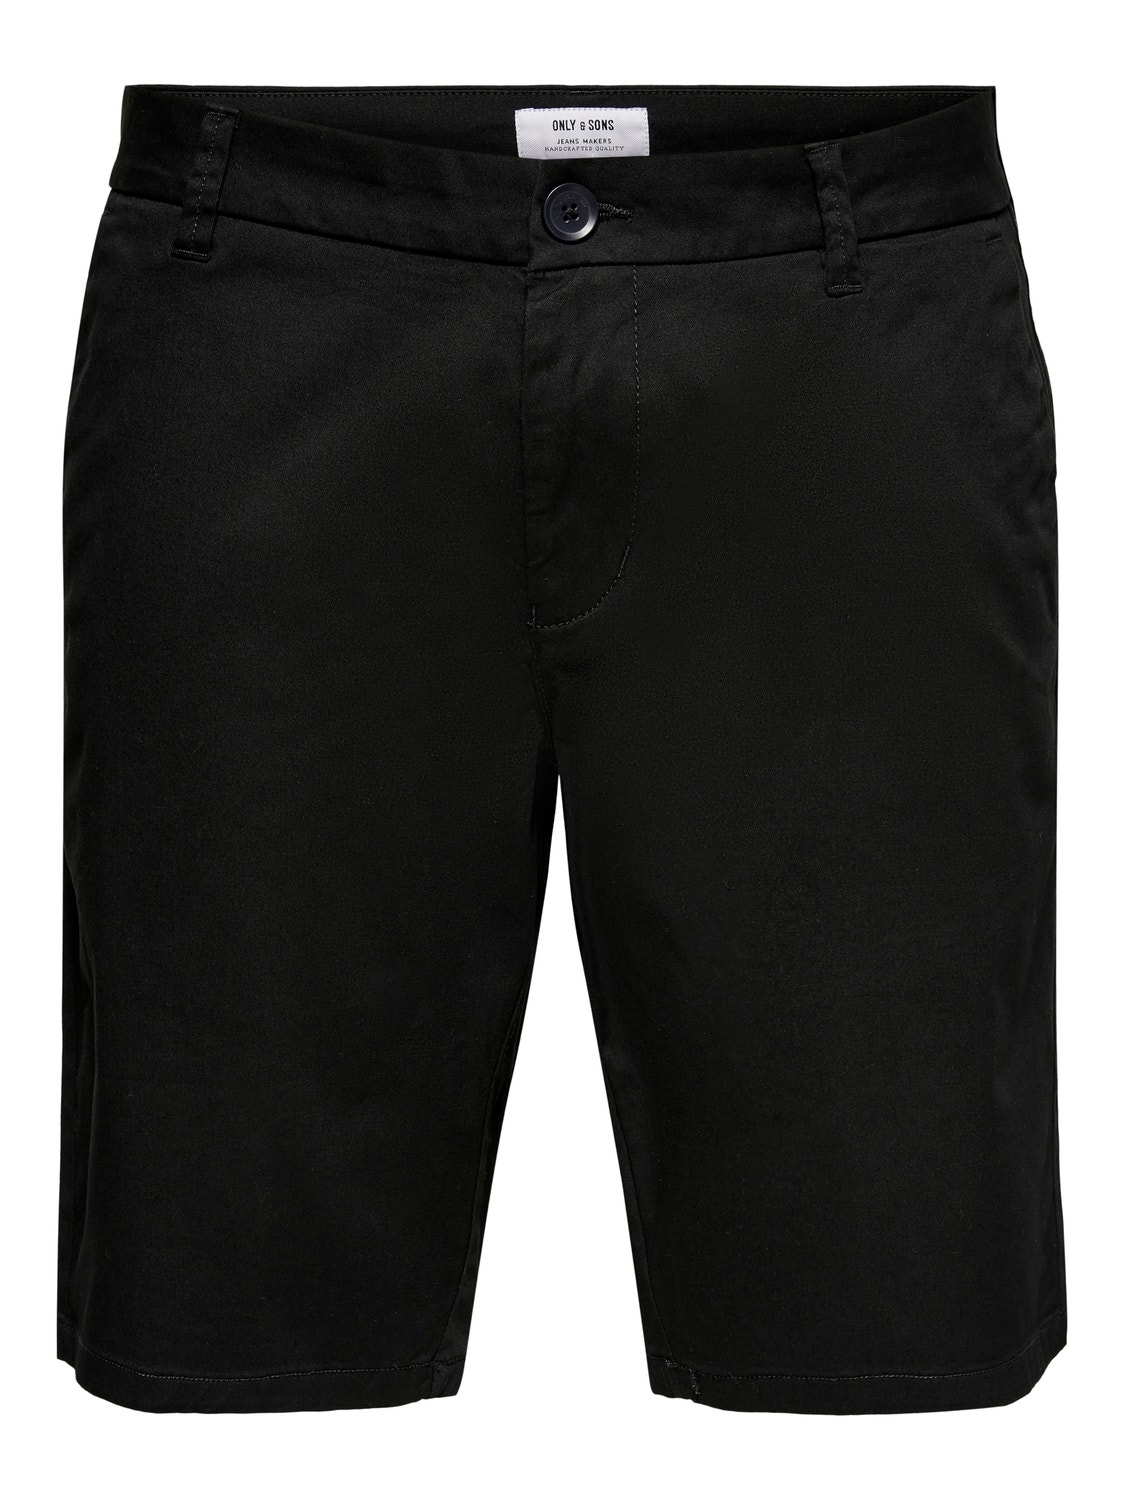 ONLY & SONS Normal passform Shorts -Black - 22018237